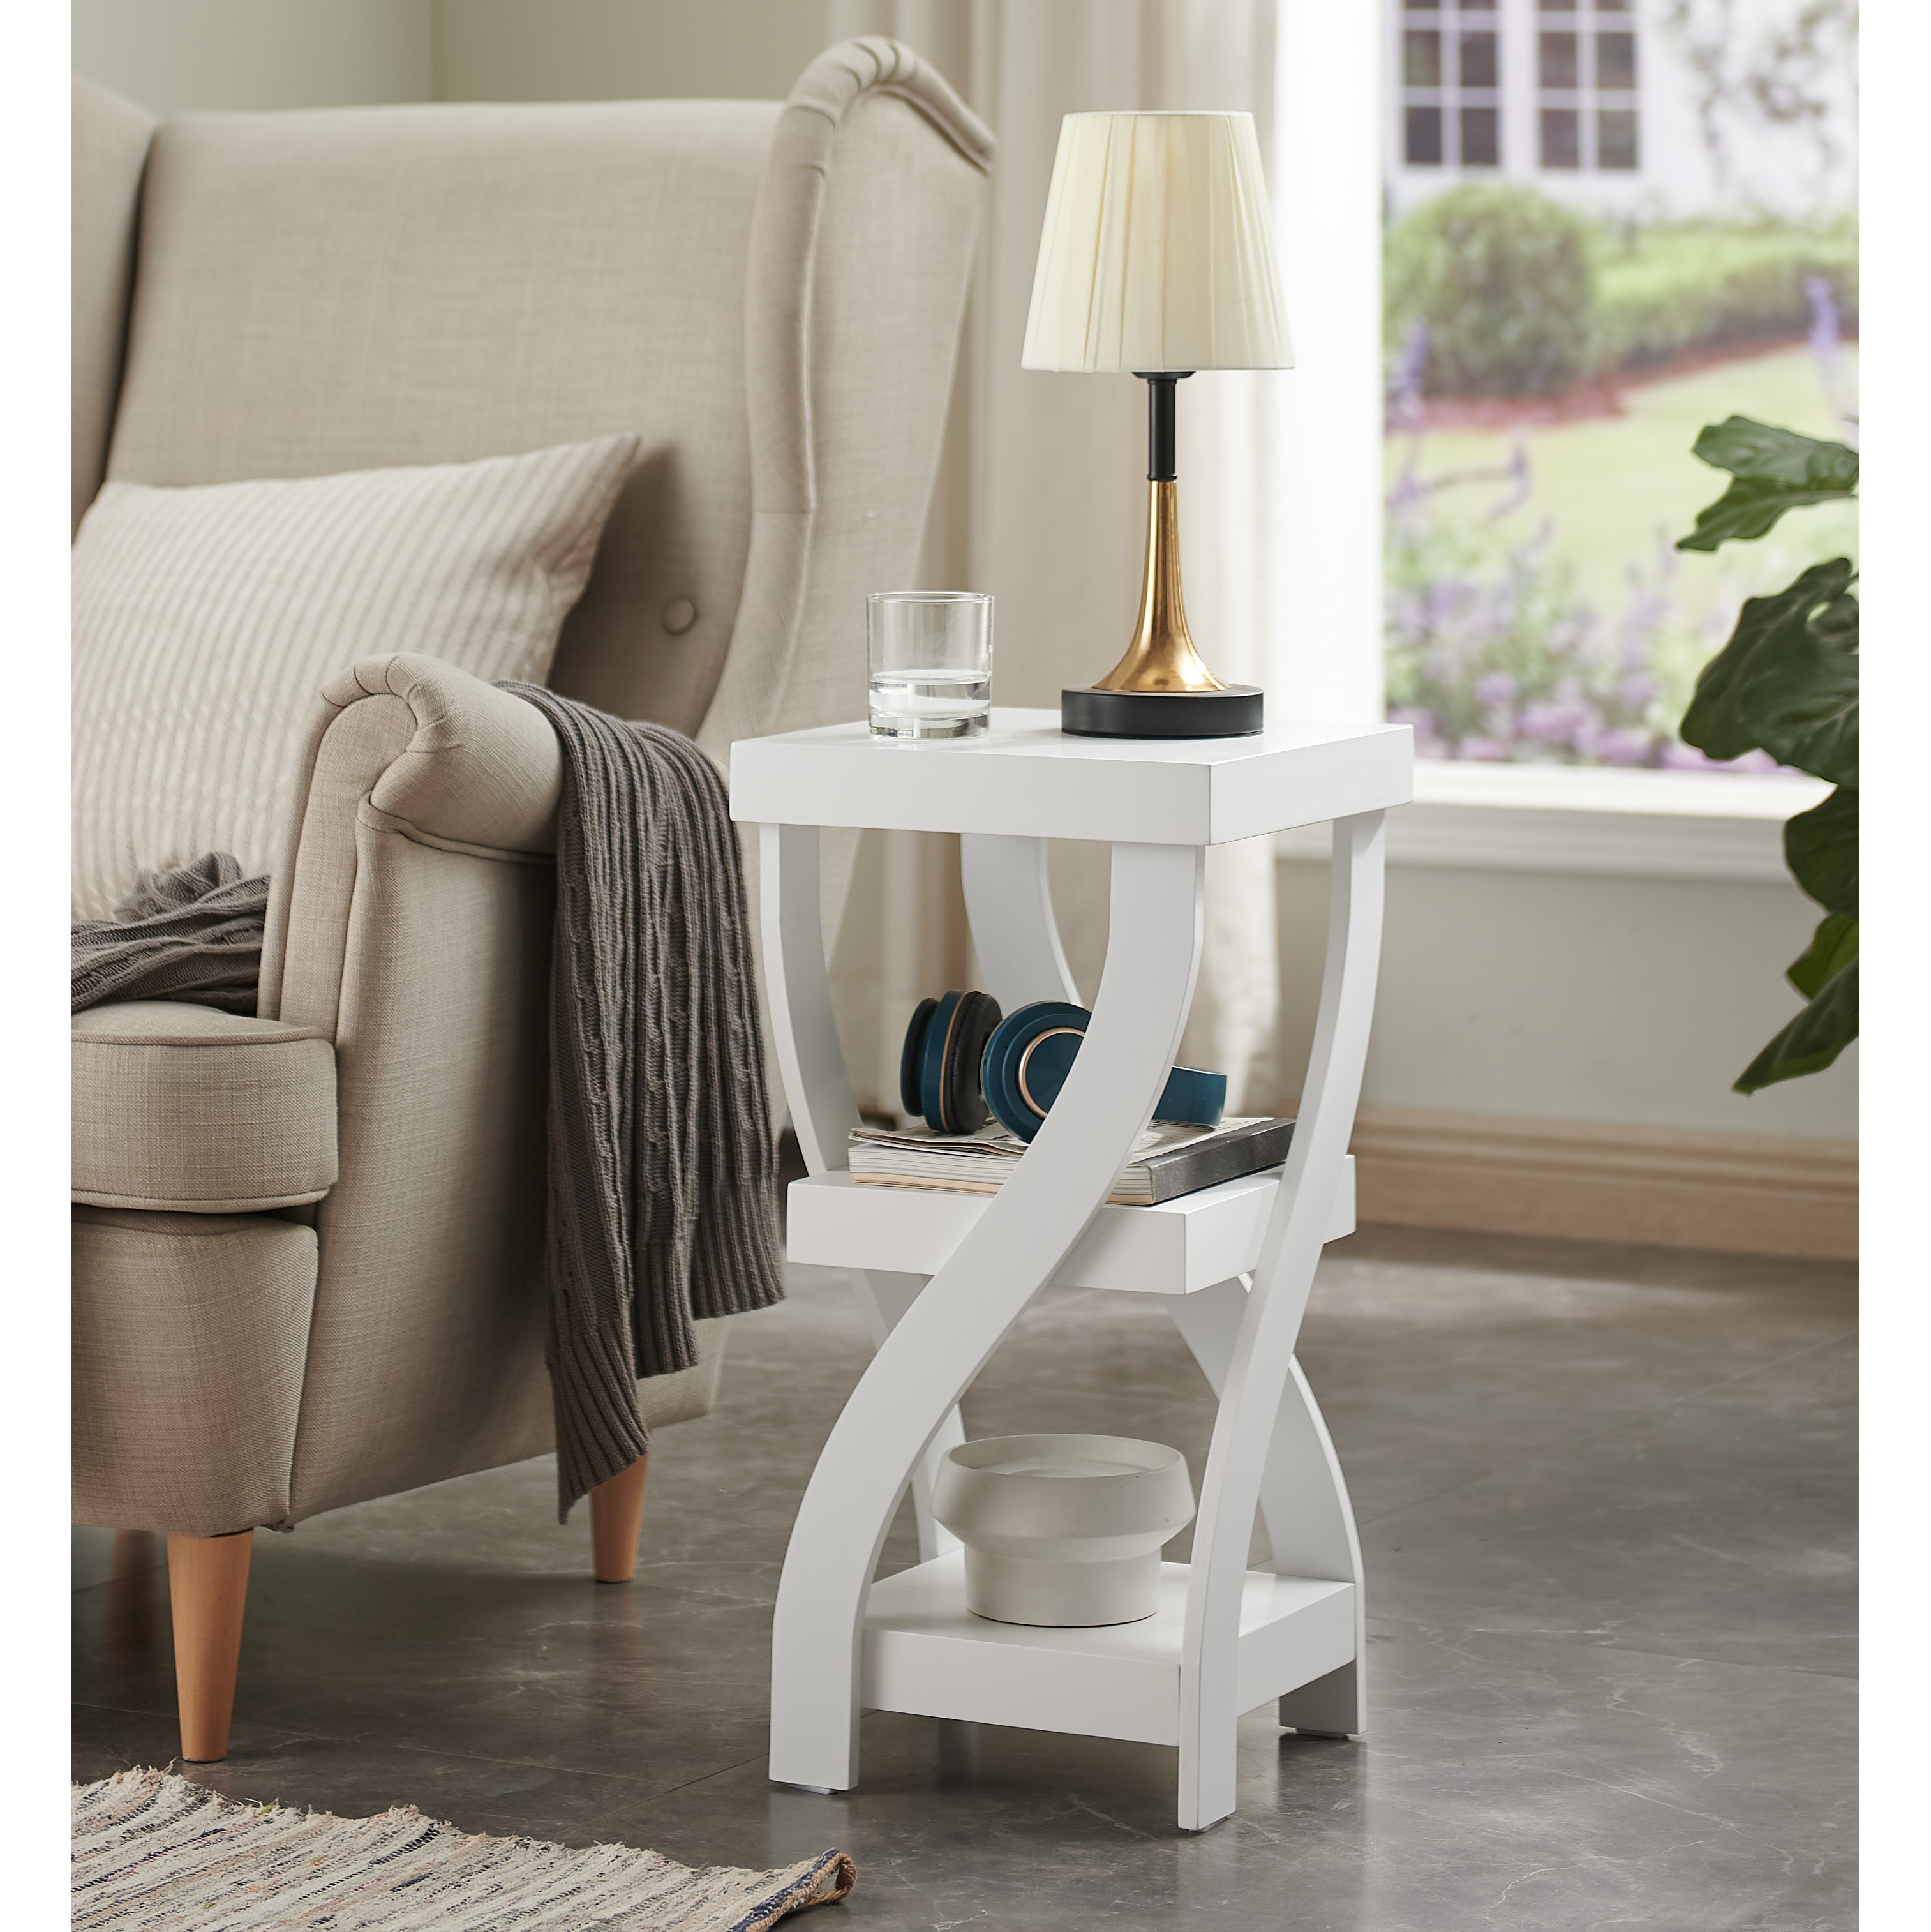 Lionel Side Table (White)